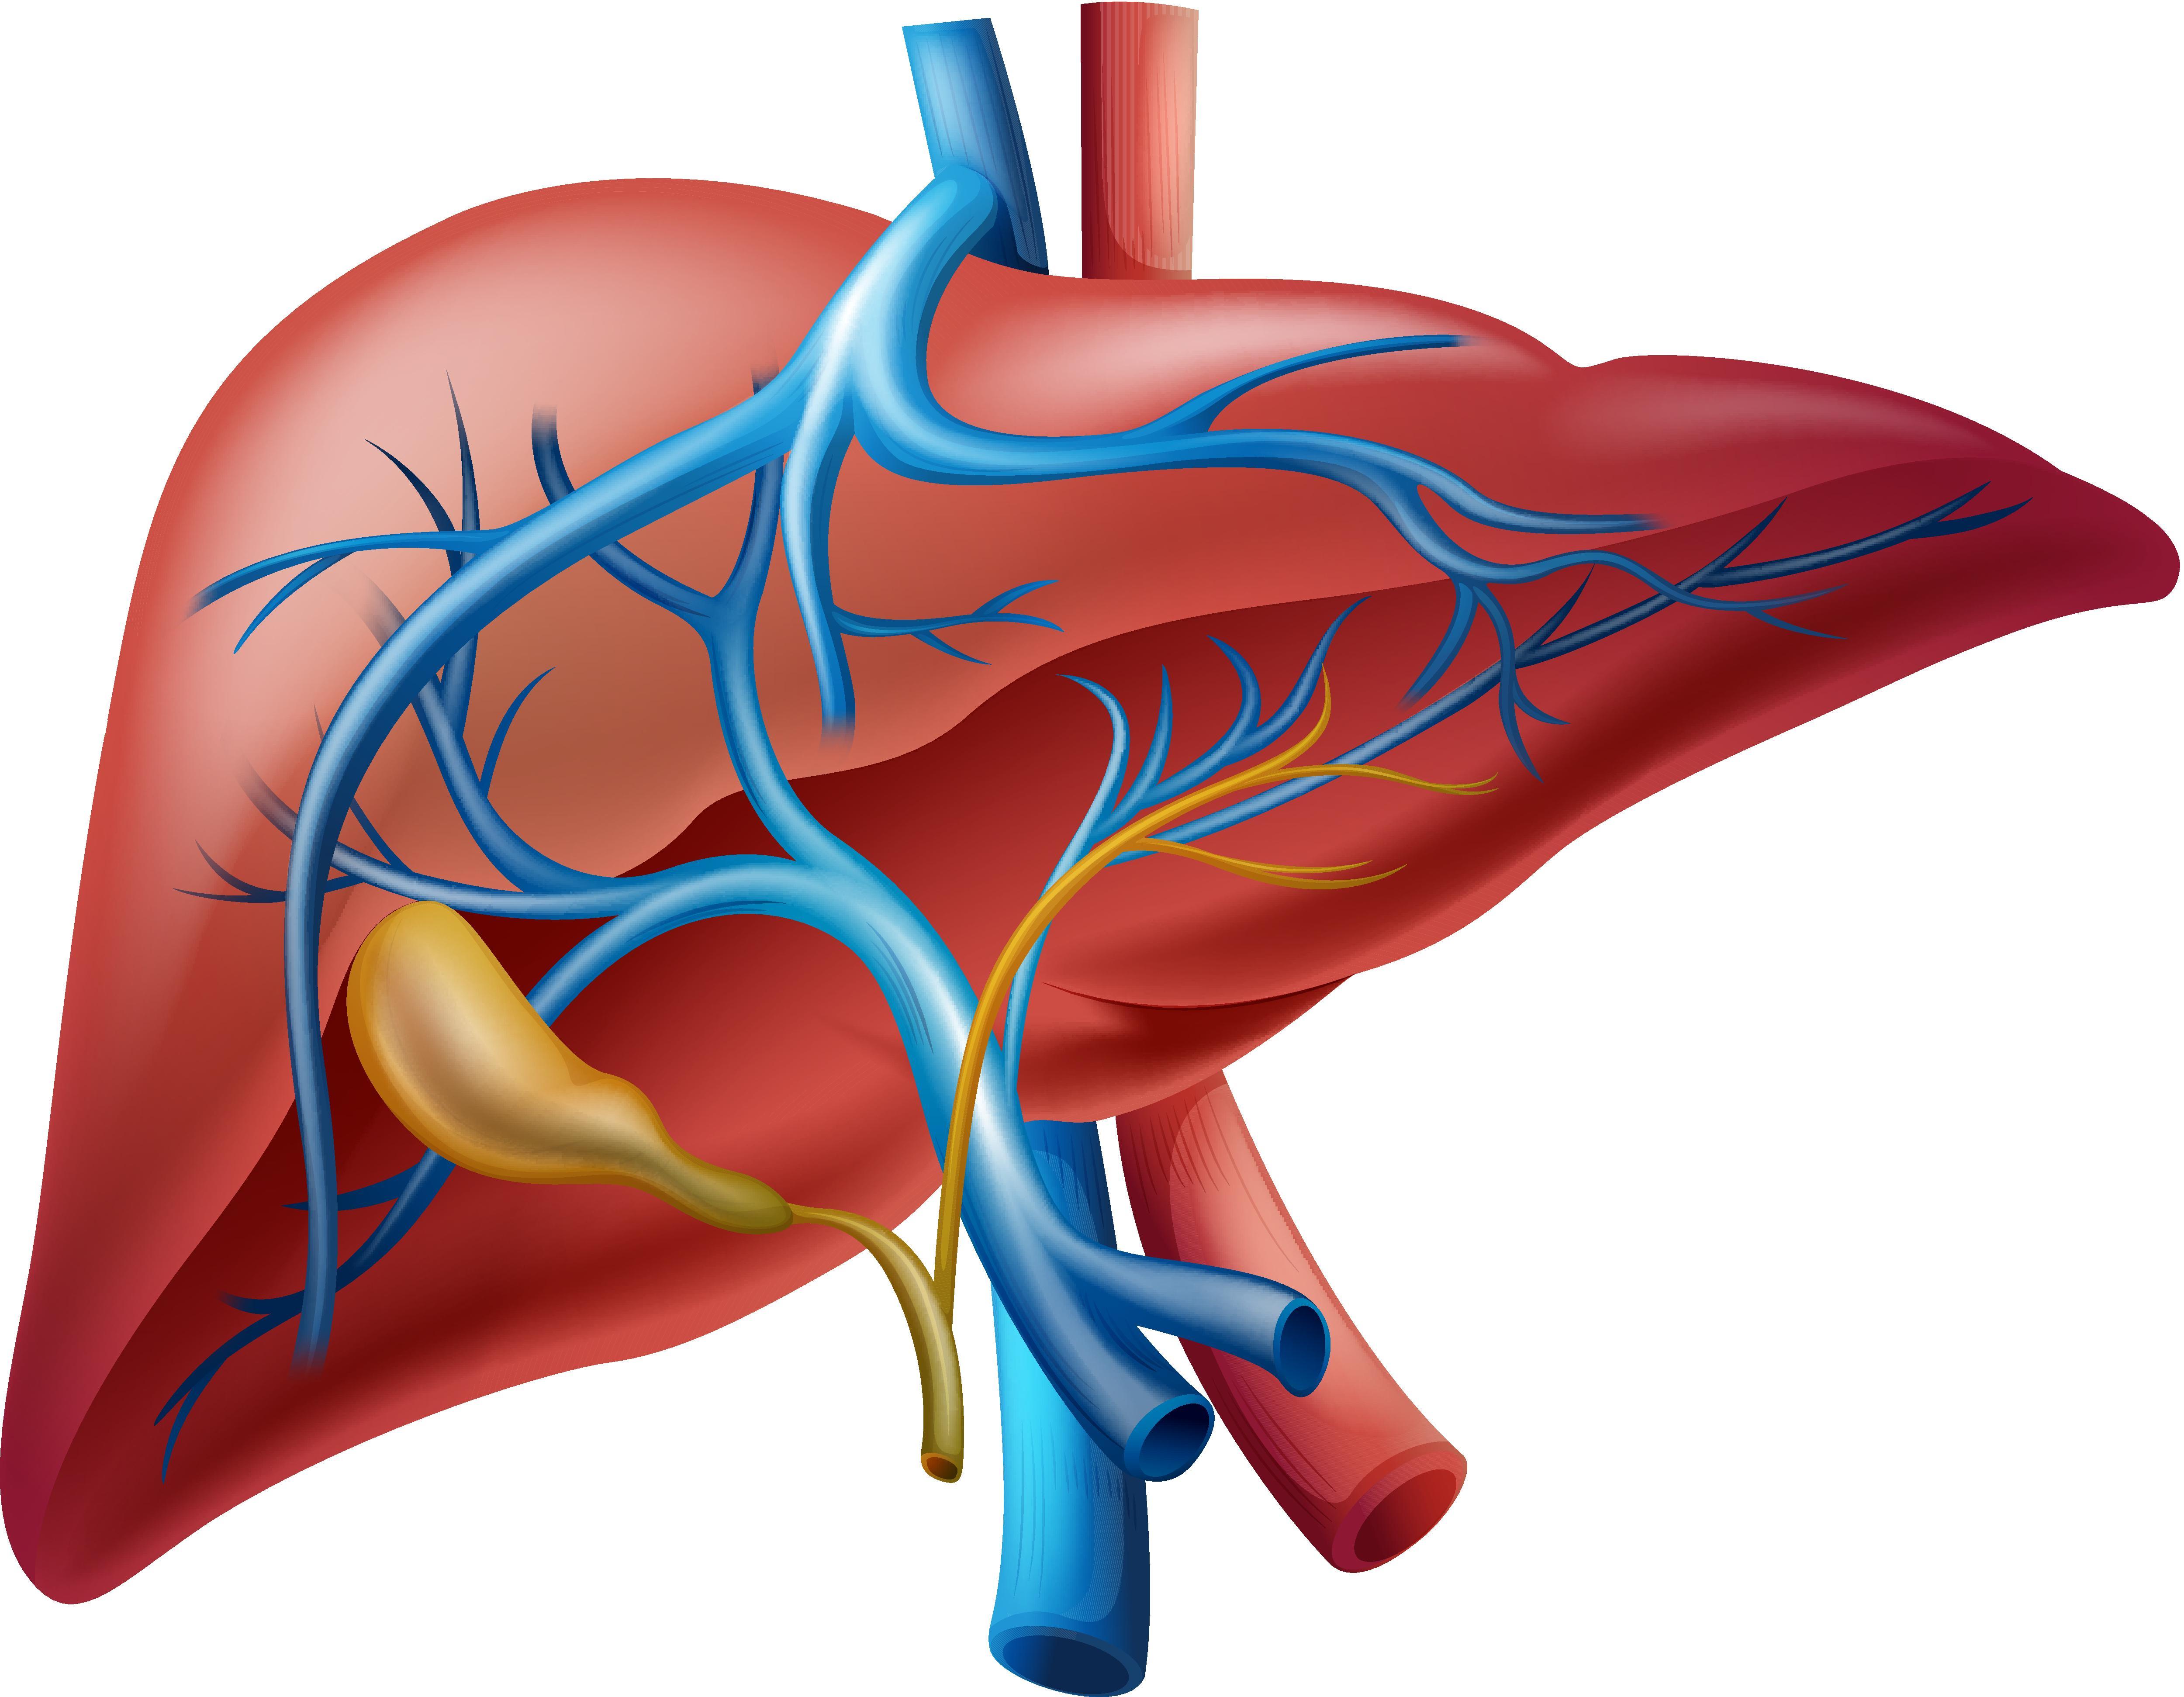 Hepatobiliary Surgery and Nutrition：使用机器学习策略预测和验证<font color="red">肝</font><font color="red">内胆管</font><font color="red">癌</font>的预后甲基化评分